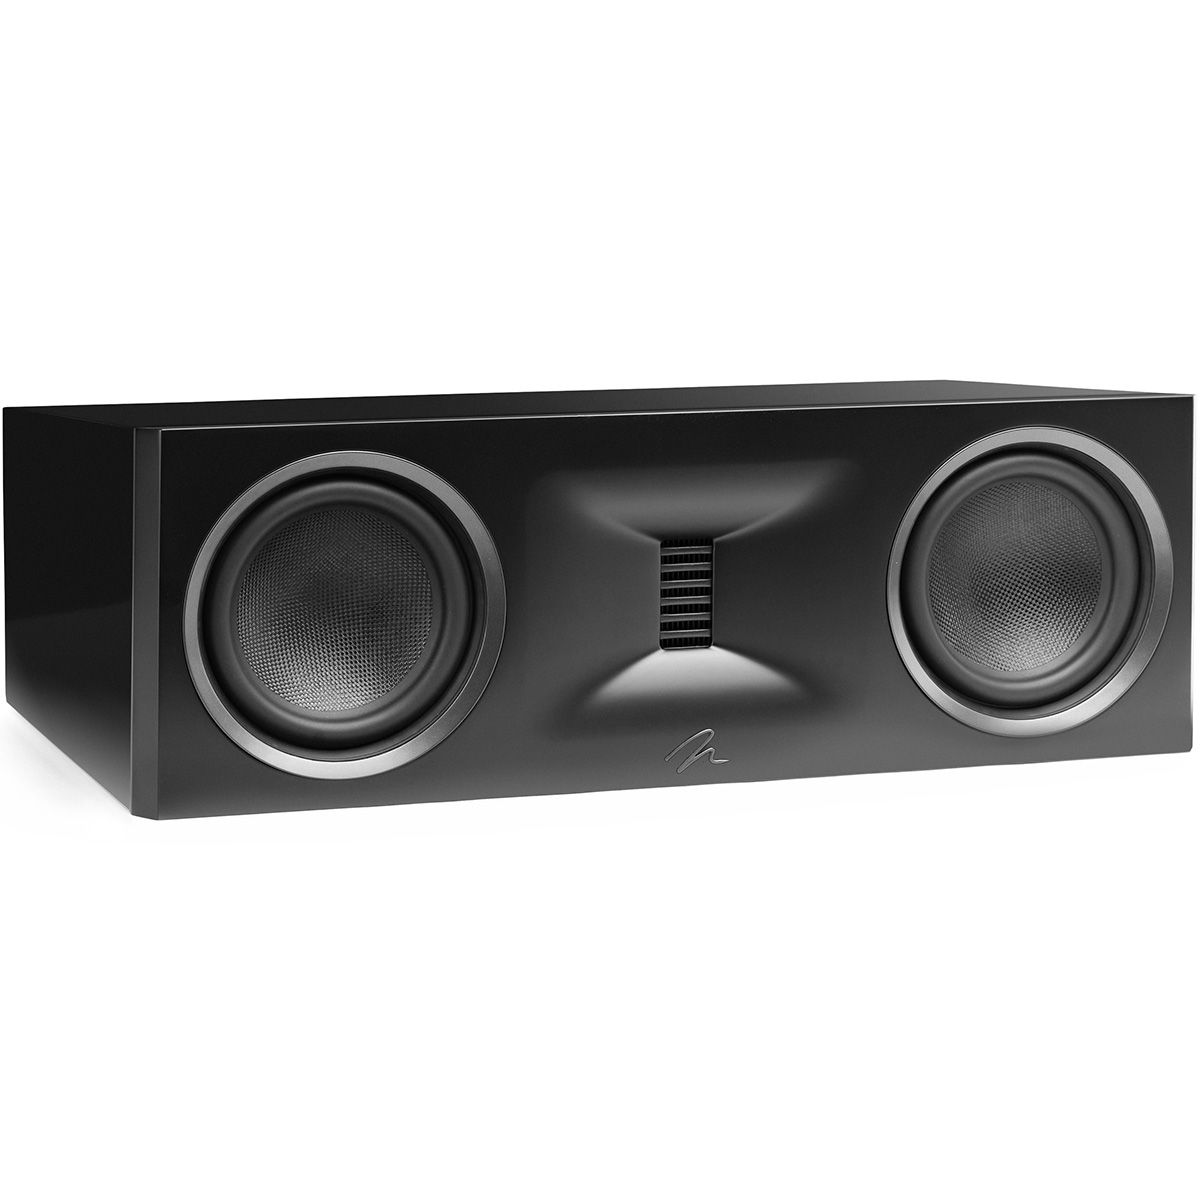 MartinLogan XT C100 center channel speaker front angle view in black without grilles